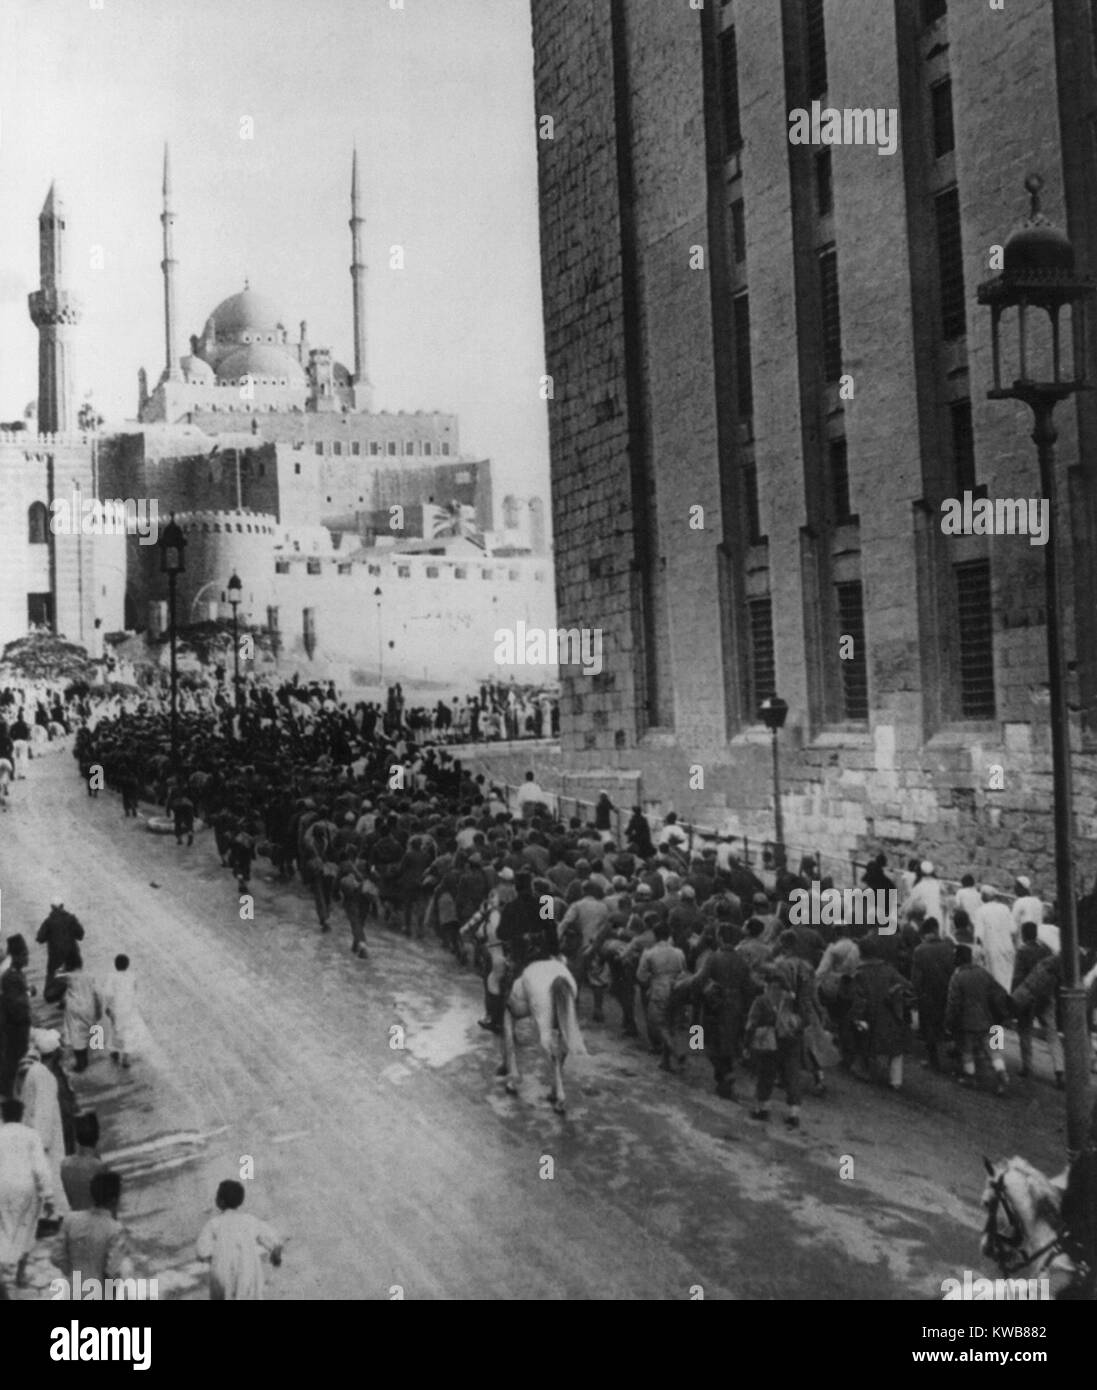 Axis prisoners captured in Libya nearing the Citadel of Cairo. Italian and German POWs march within view of the Mohamed Ali Mosque above and the Mosque of Sultan Hassan. Ca. 1942 during World War 2. (BSLOC 2014 10 8) Stock Photo